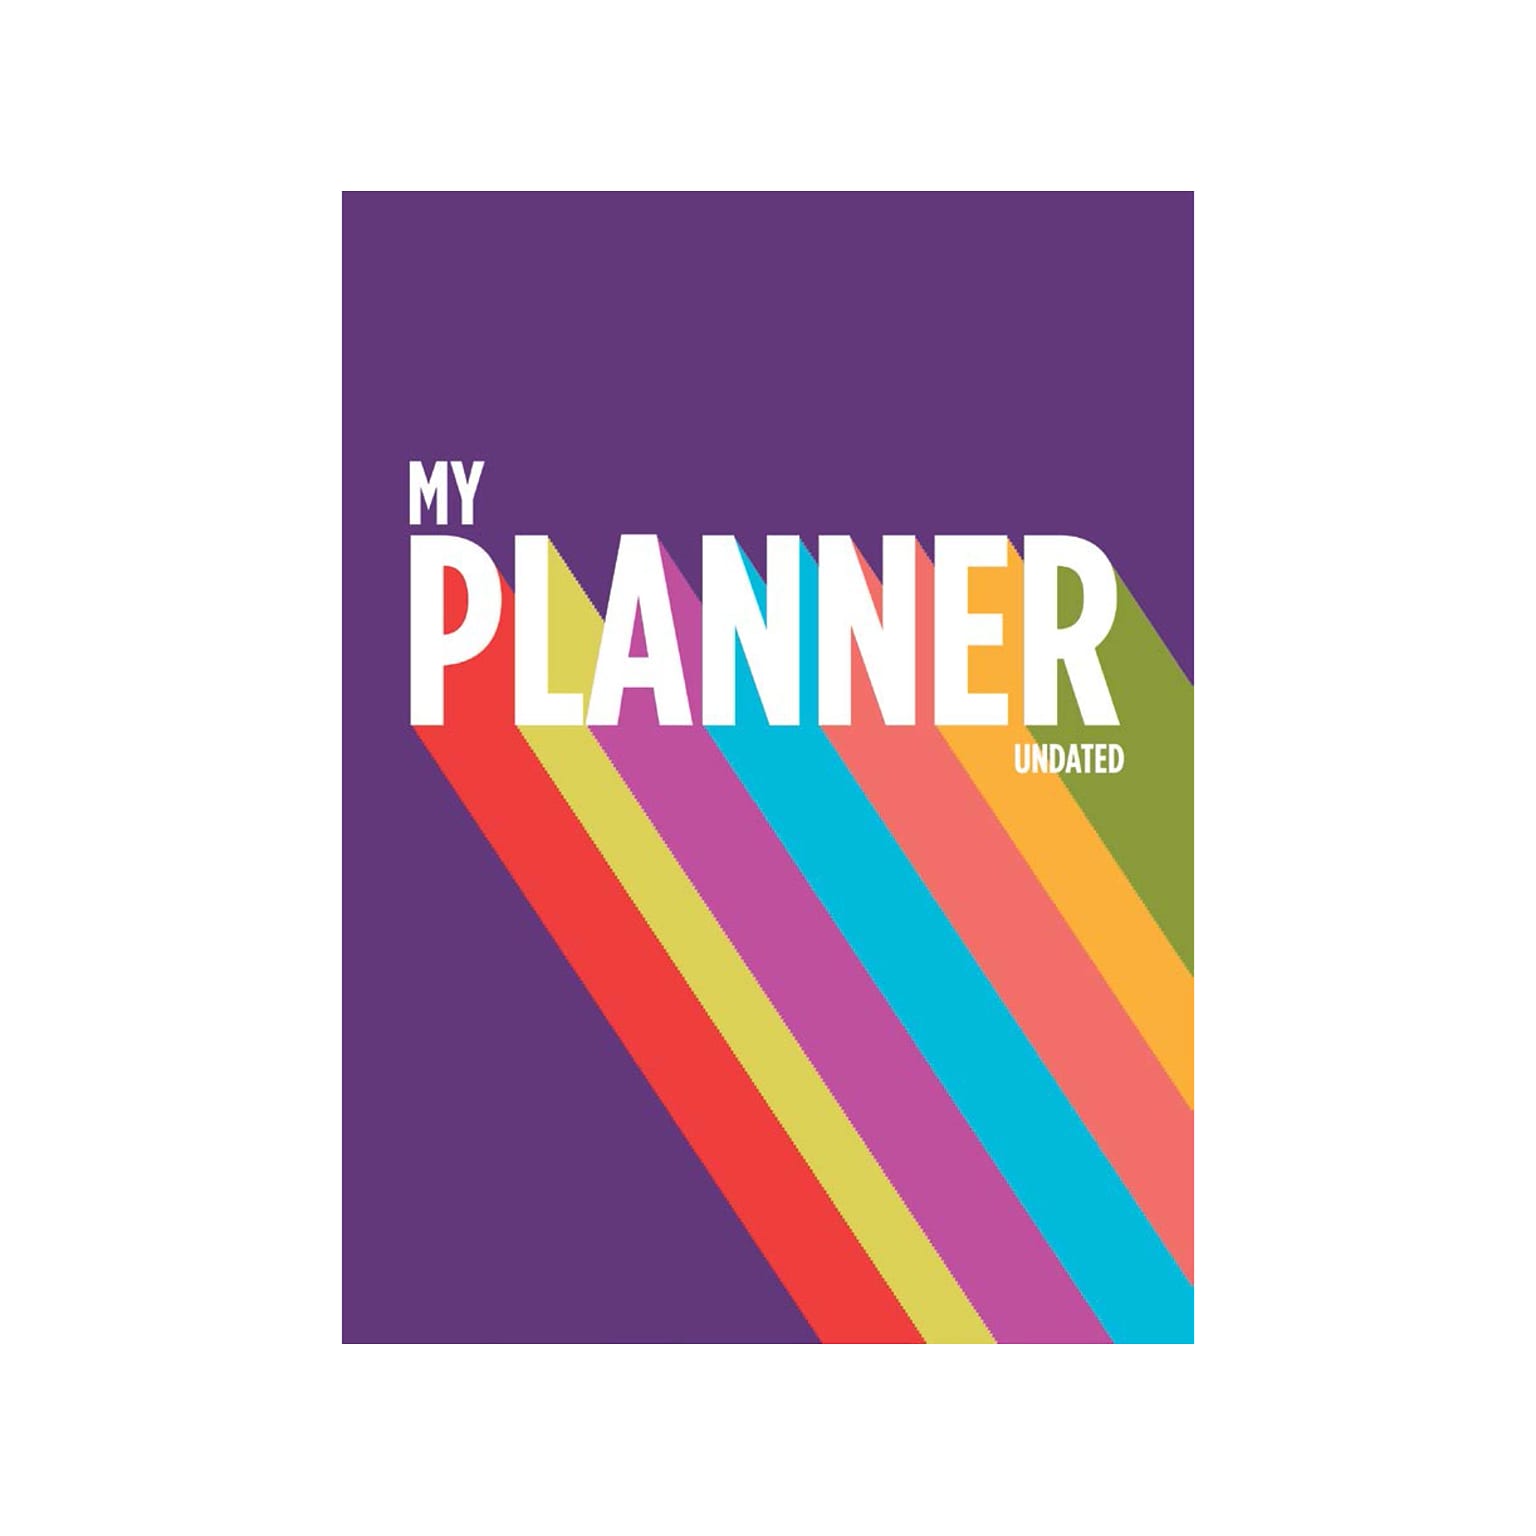 TF Publishing 7.5 x 10.25 Monthly Planner, Rainbow (99-4209)